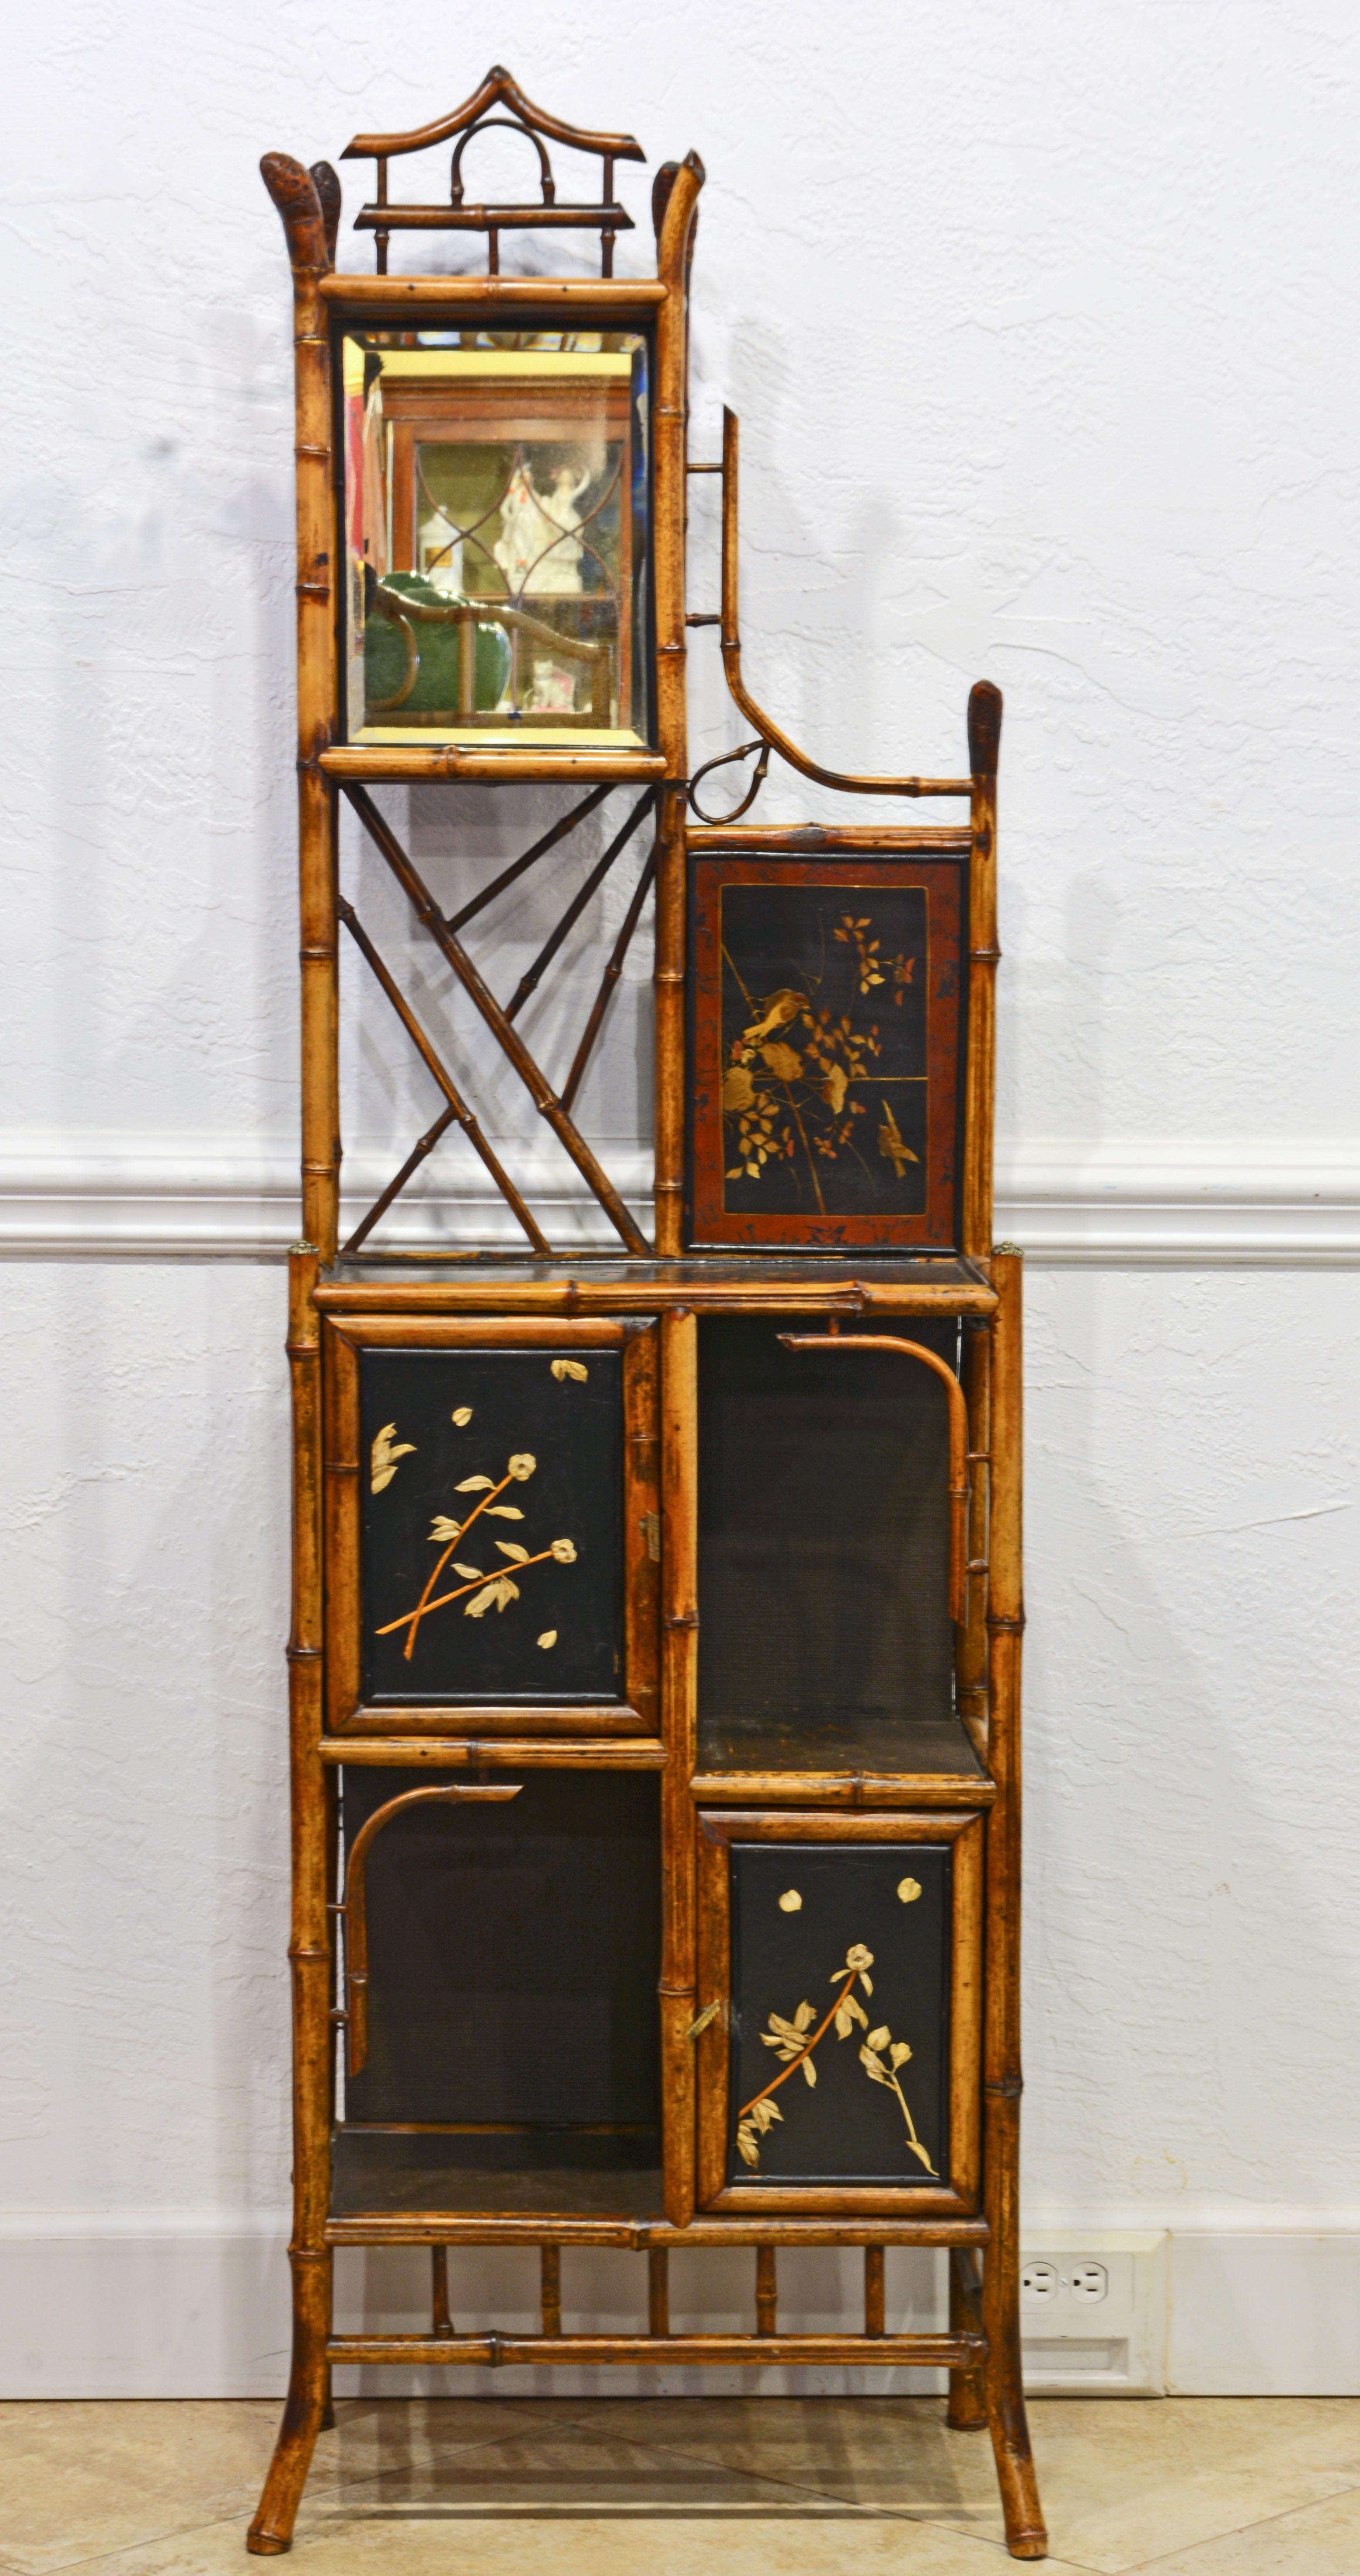 This English bamboo and lacquer etagere dating to around 1880 is fashioned with artistic details that links it to the Aesthetic Movement. It features an upper section with mirror, decorated panel and shelves above a lower section with two carved